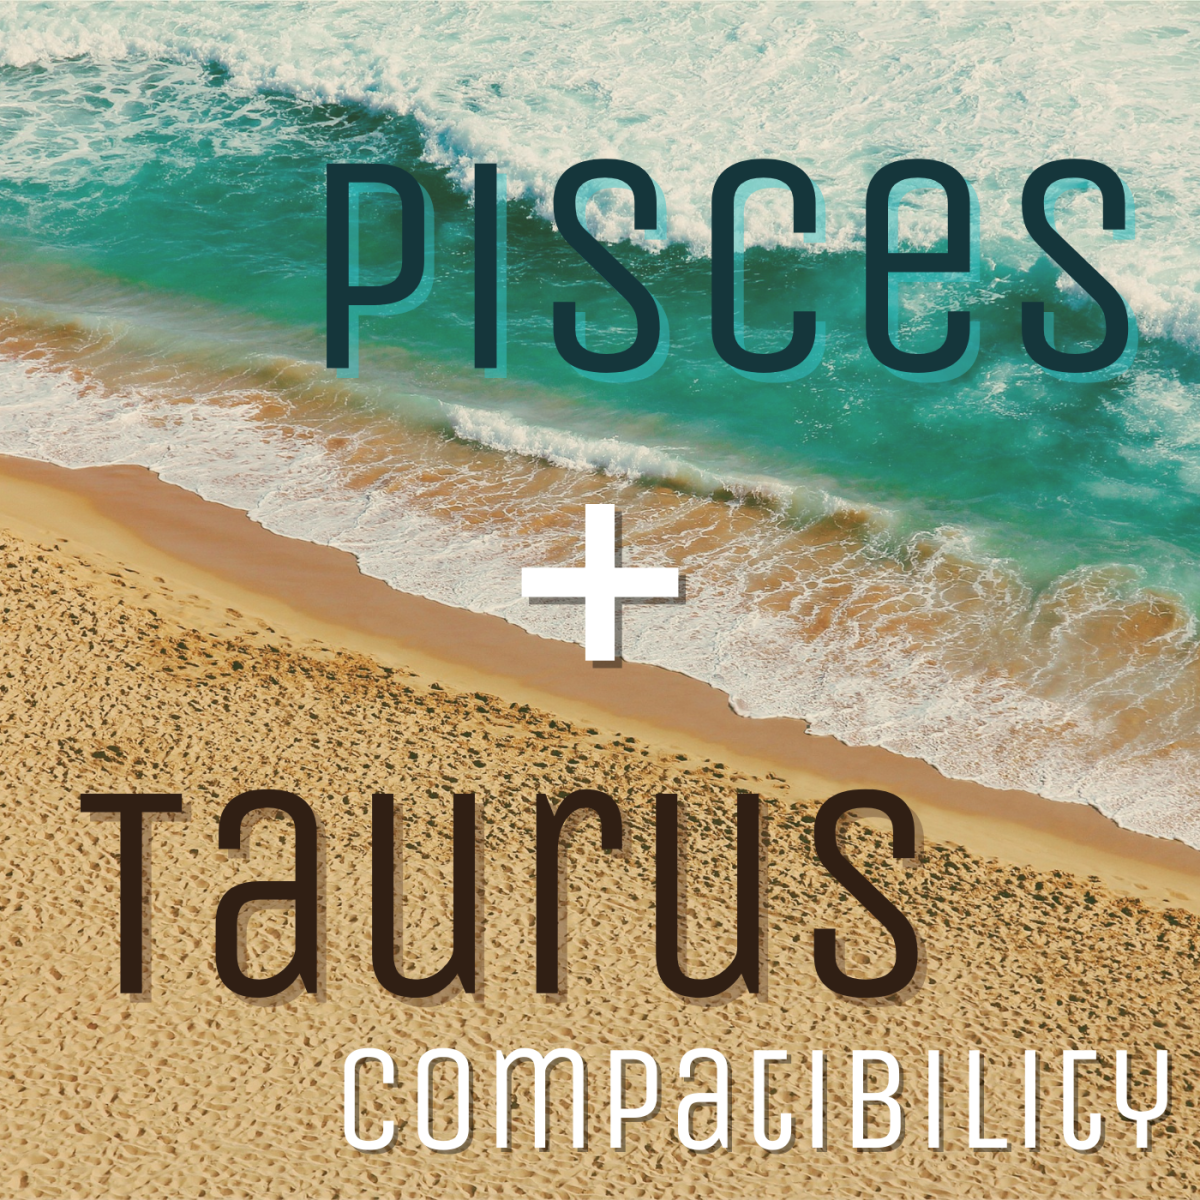 How compatible are the fish and the bull in a relationship? Learn more about Pisces and Taurus.